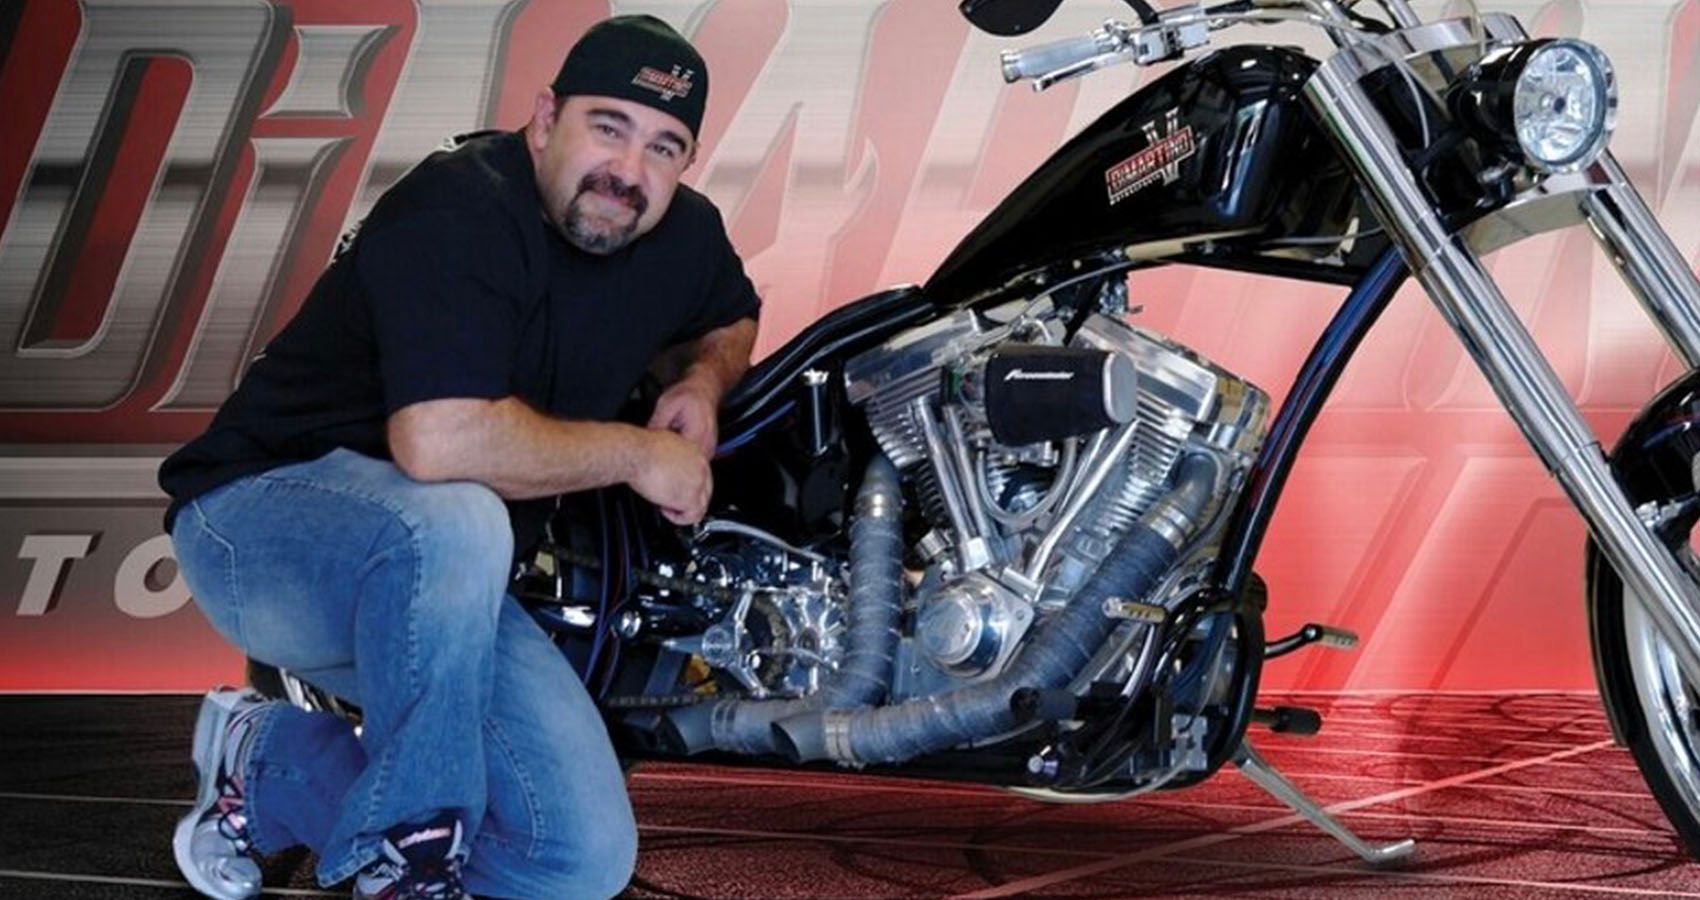 Here's Where Vinnie From OCC And American Choppers Is Today